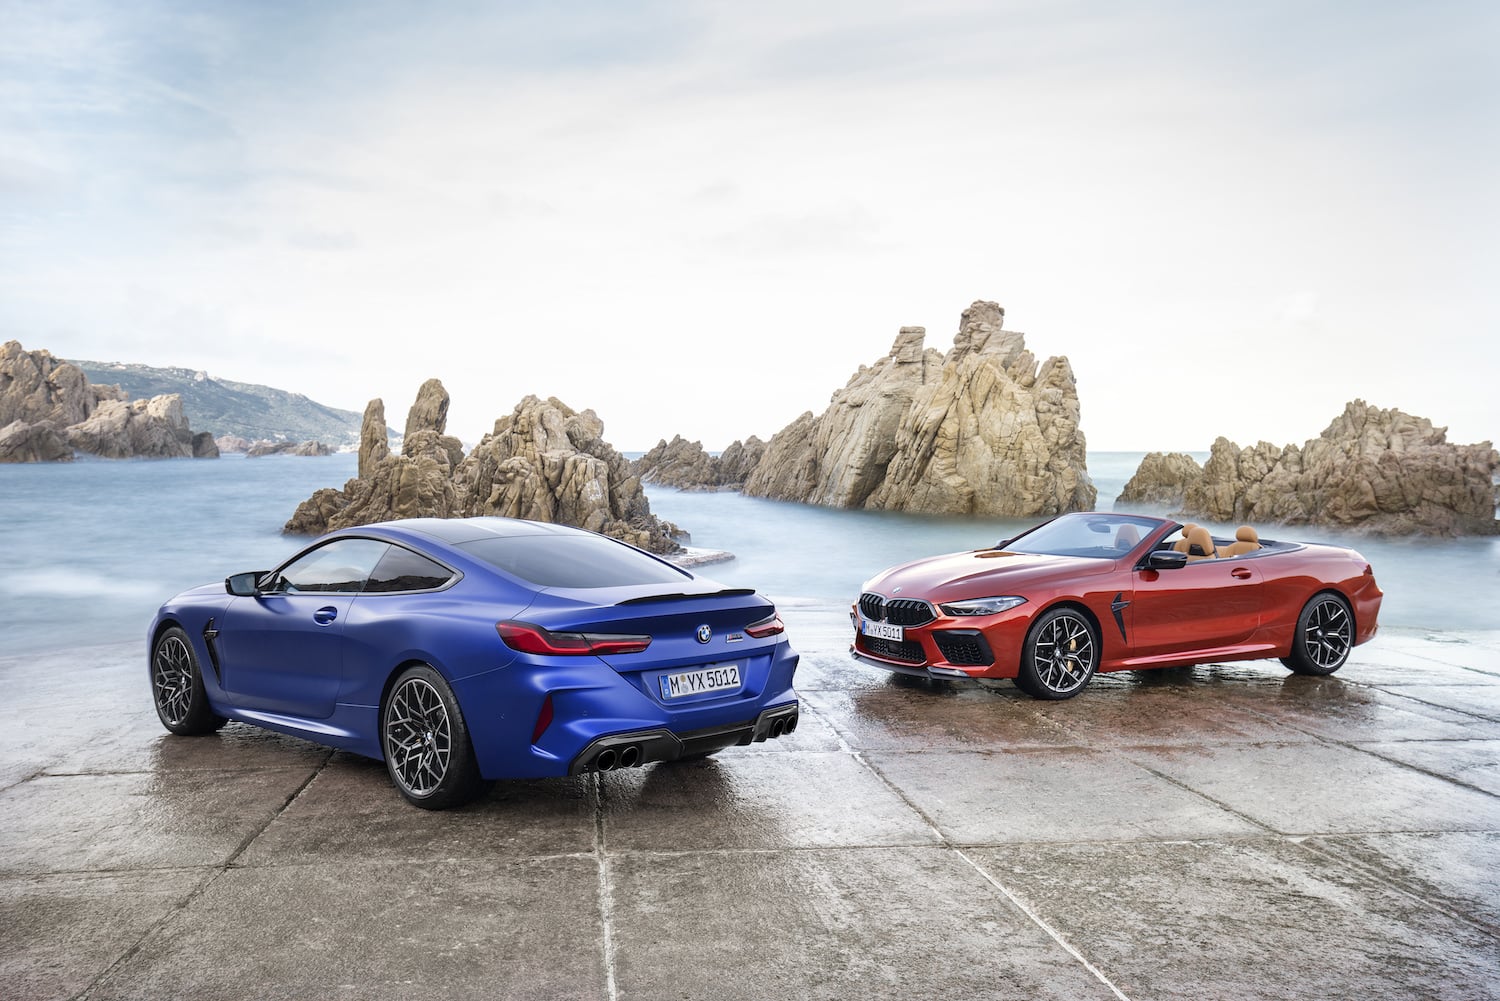 All you need to know about the new BMW M8 coupe and convertible